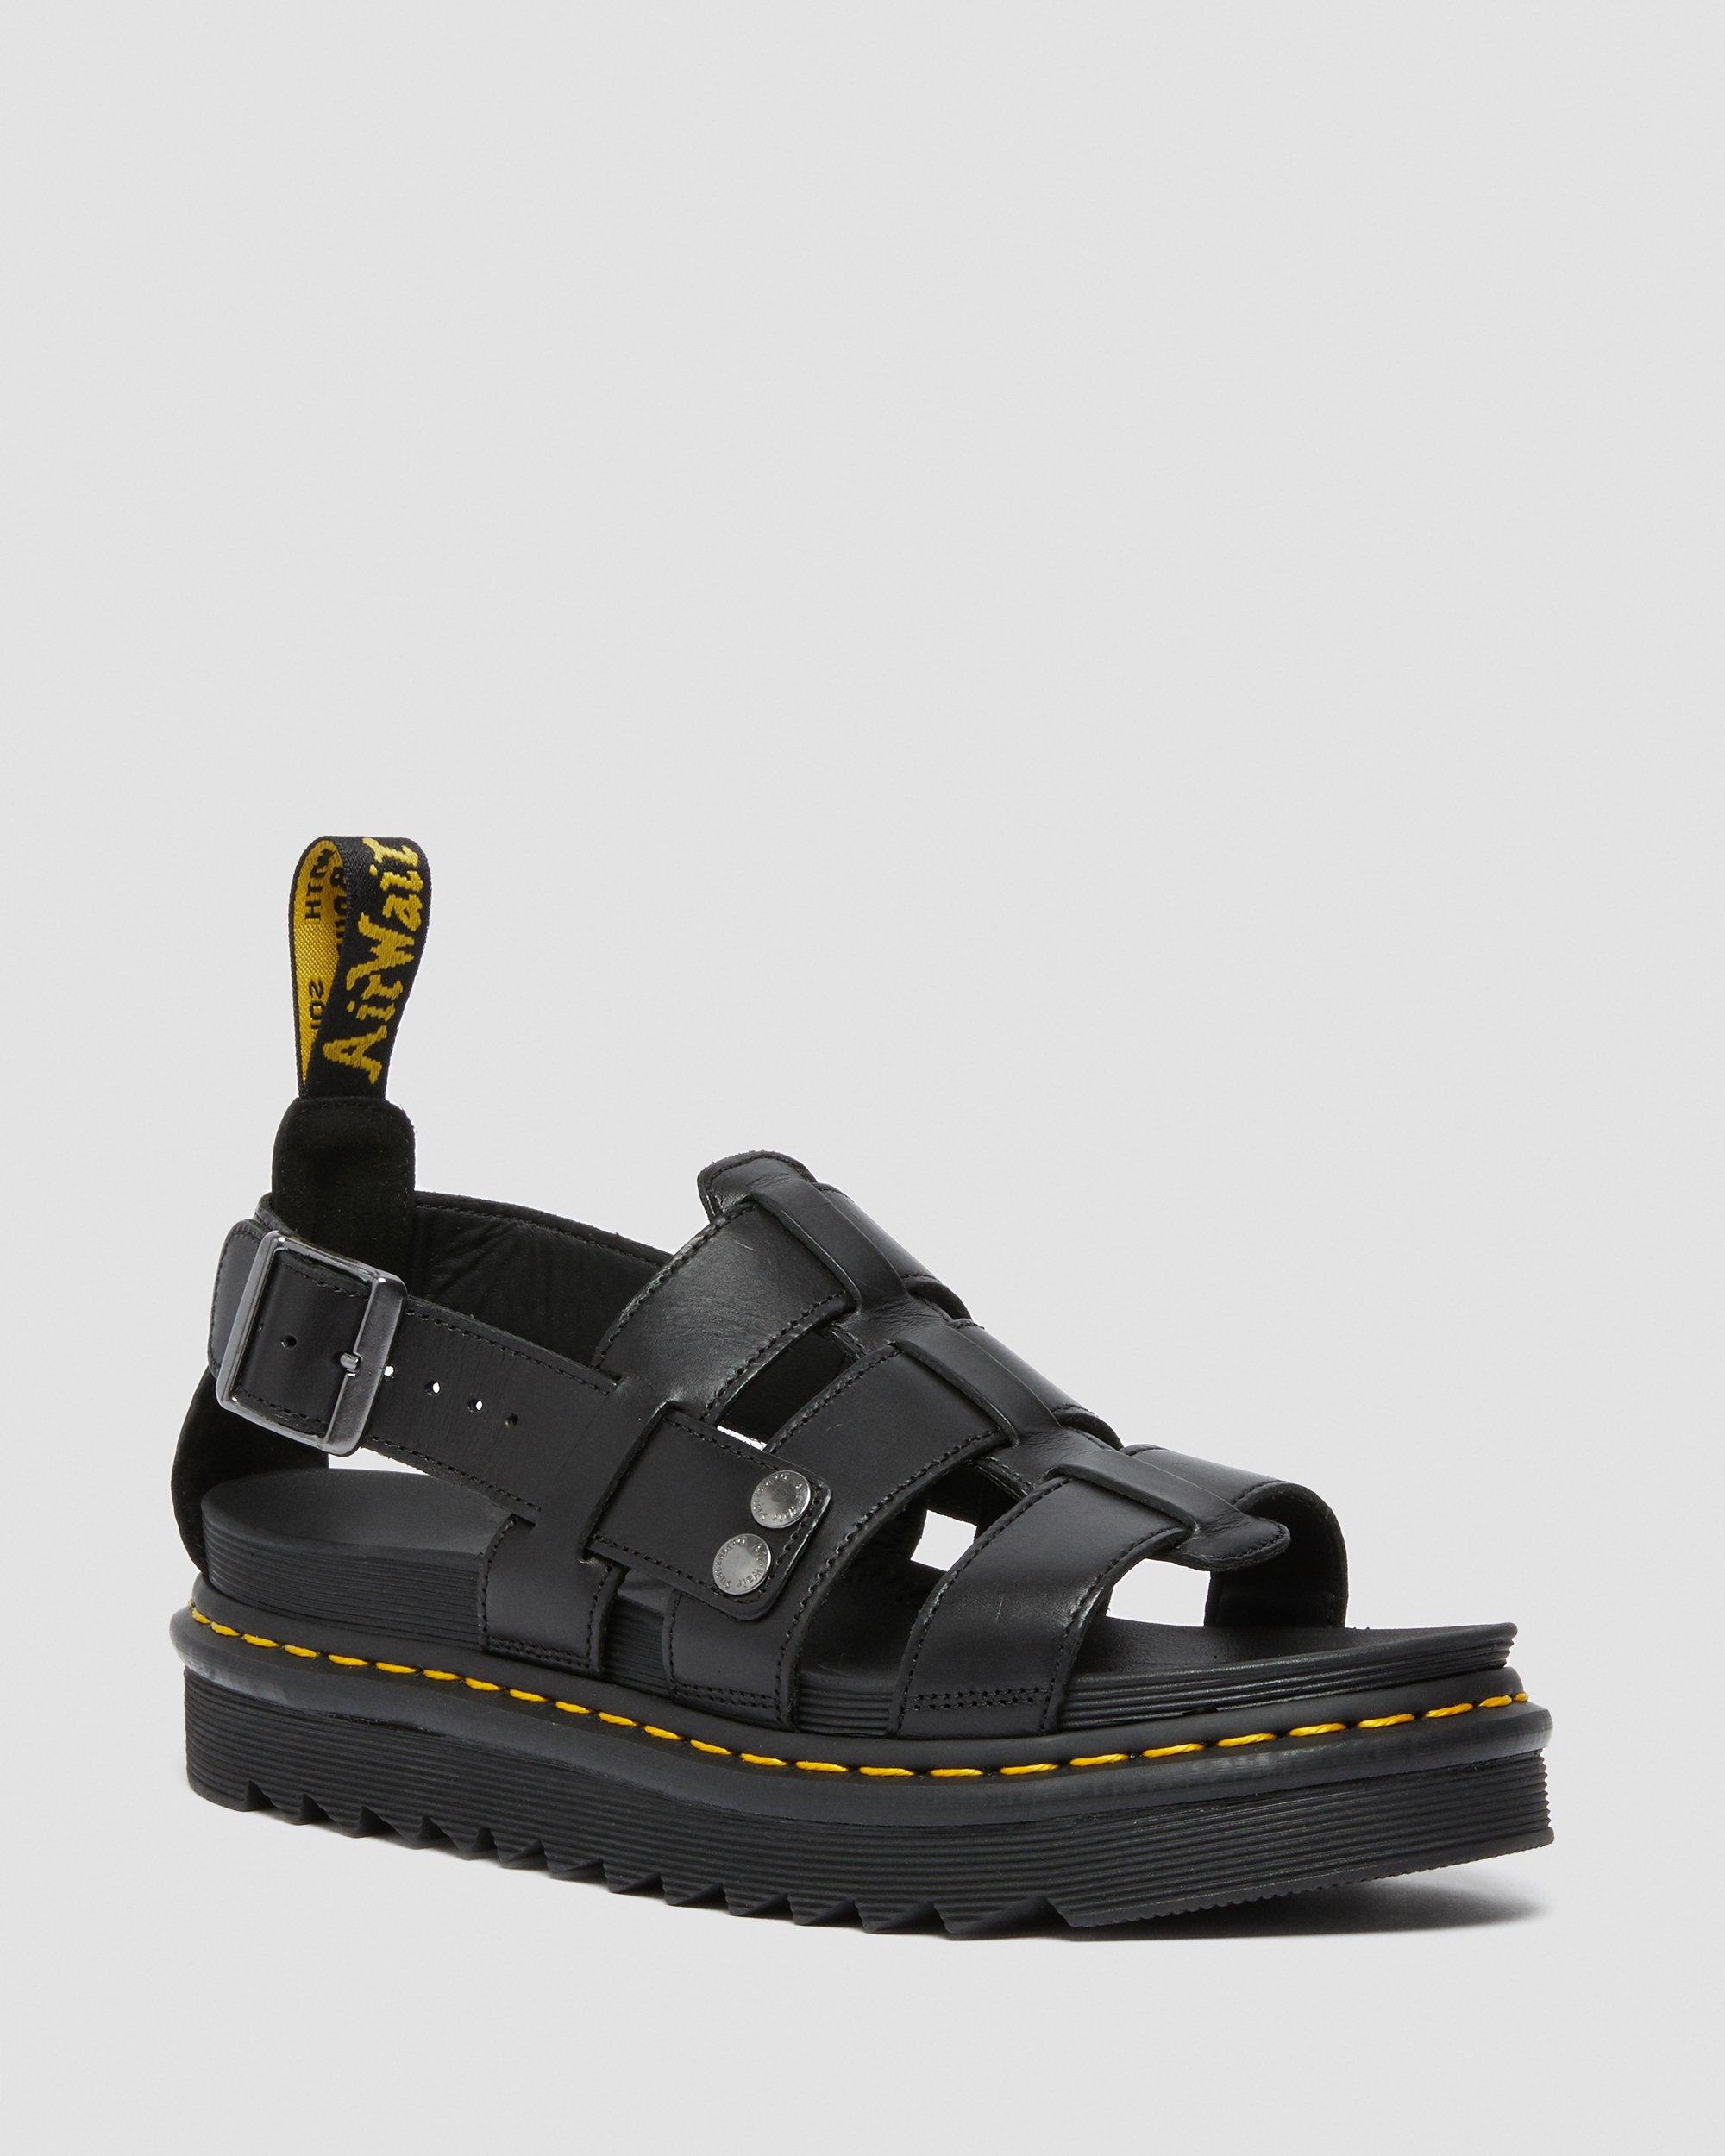 TERRY LEATHER SANDALS in Black | Dr. Martens